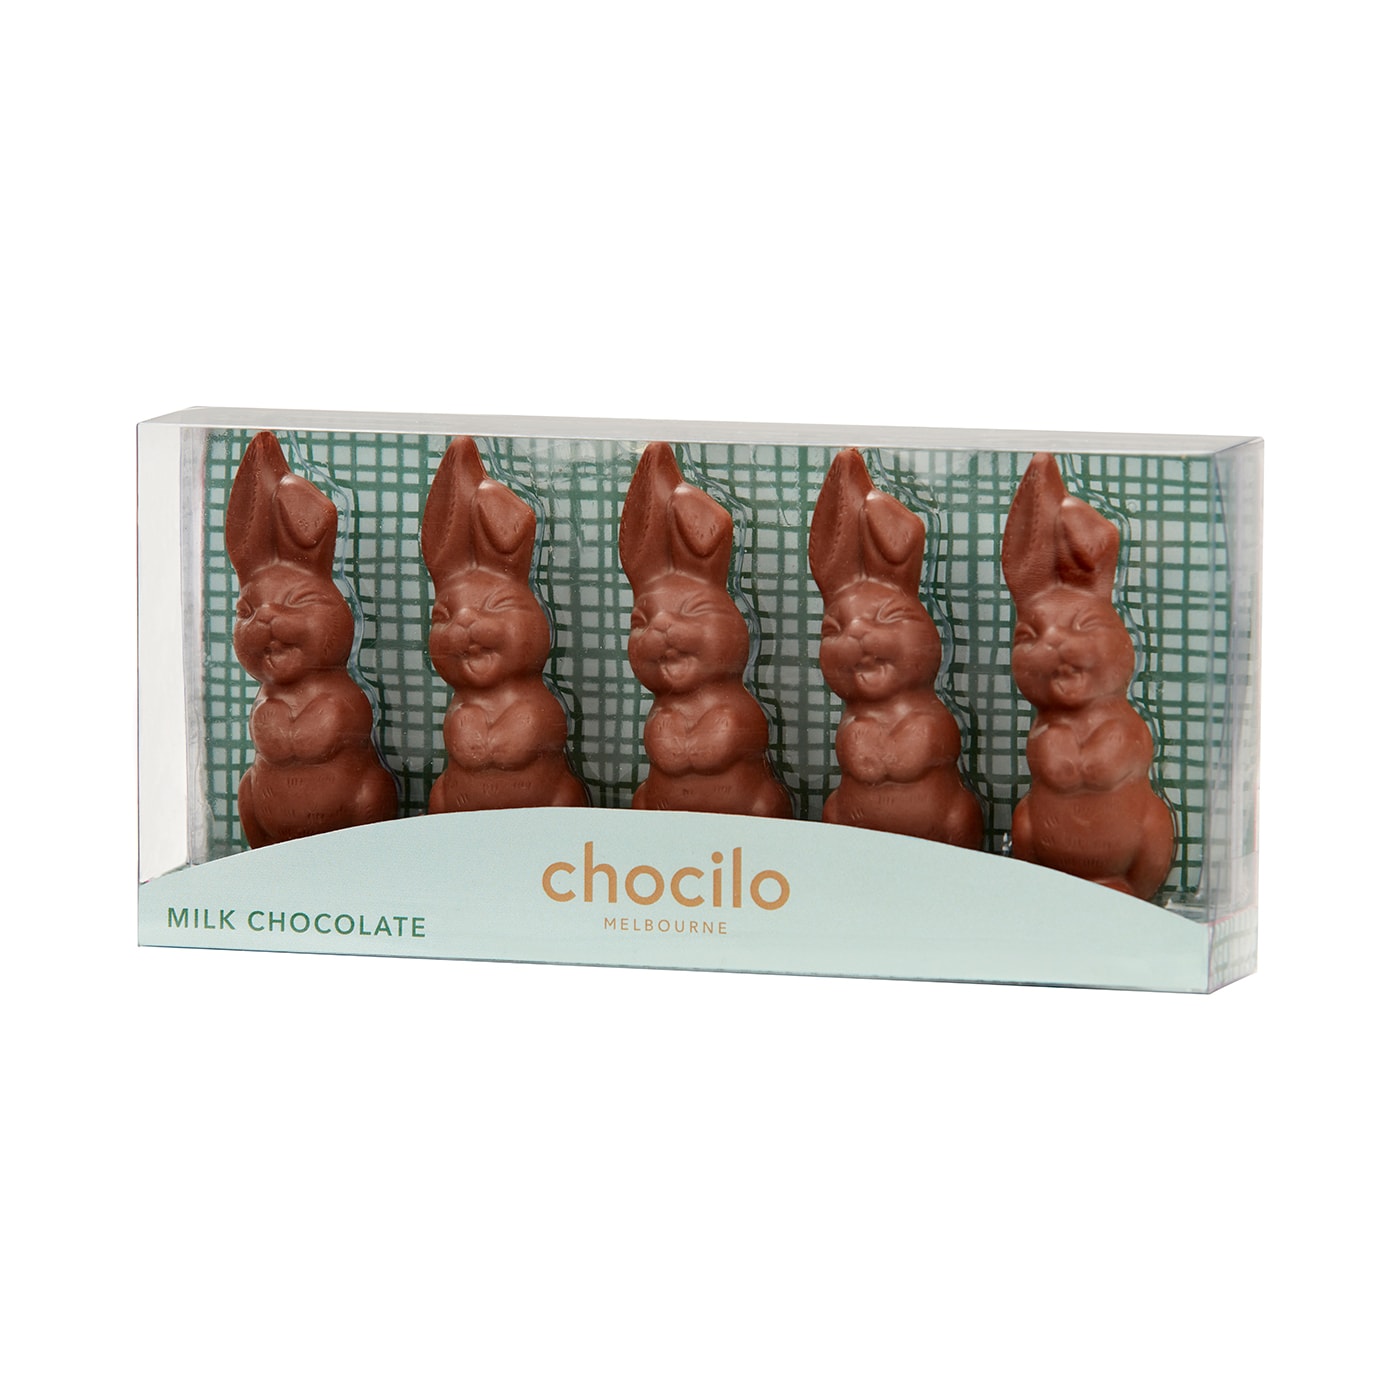 Family of Milk Chocolate Easter Bunnies in clear gift box.